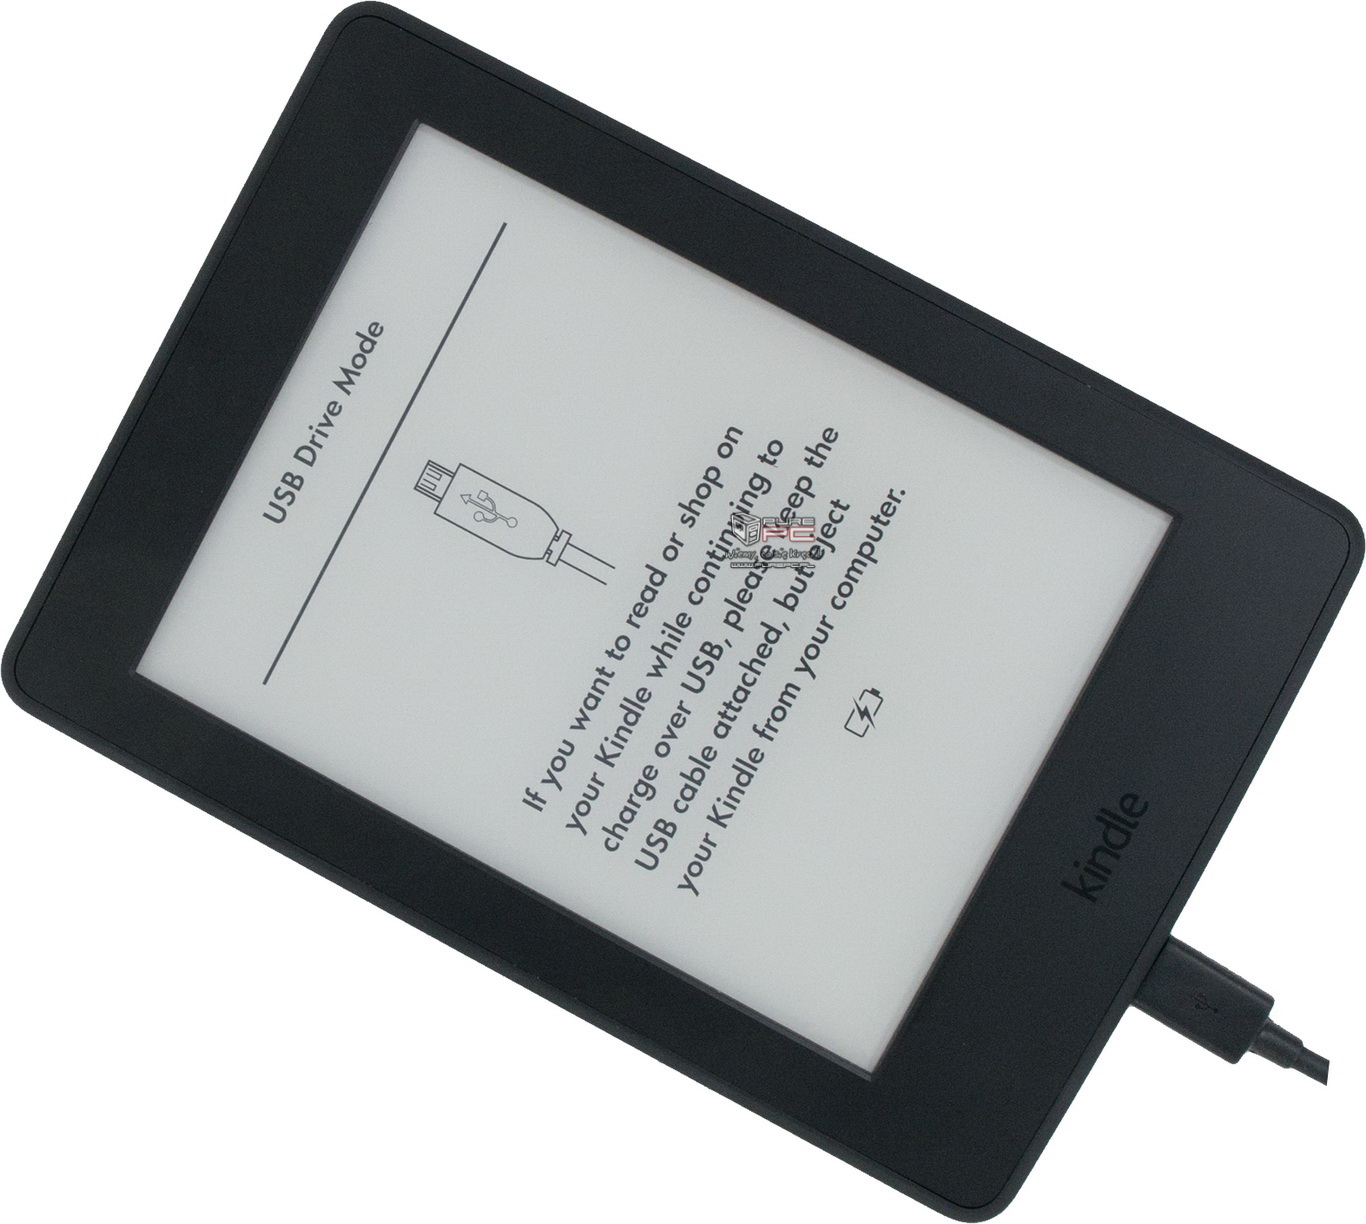 Kindle Paperwhite 3 - Kindle Paperwhite 3 7th - 7714213326 - oficjalne archiwum ... / English, spanish, brazilian portuguese, french, german, italian, japanese, russian, dutch, and simplified chinese.